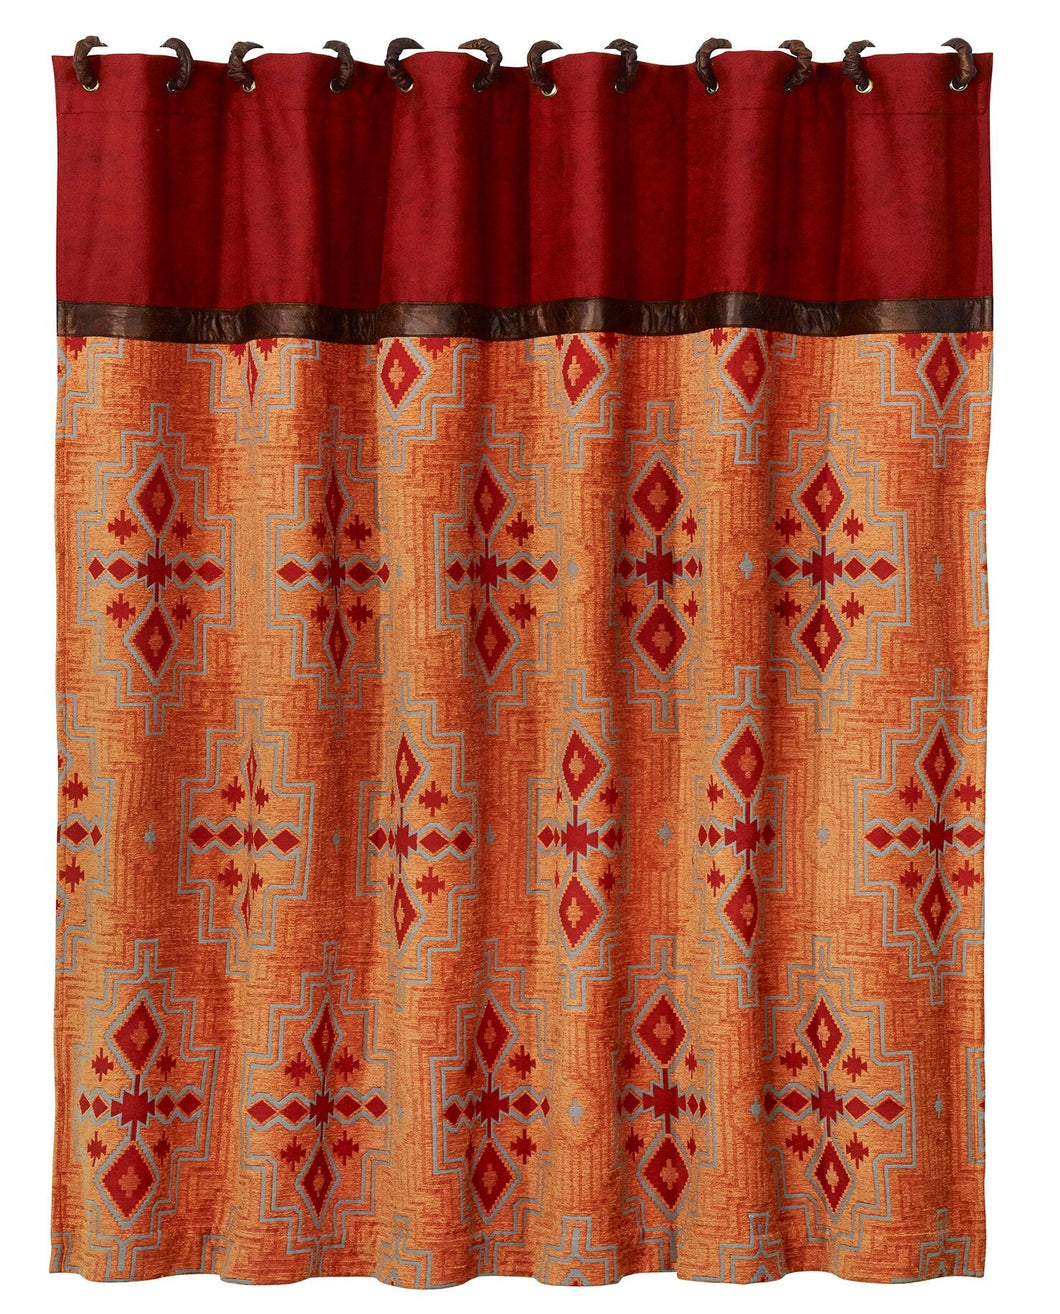 Corrales Sunset Shower Curtain